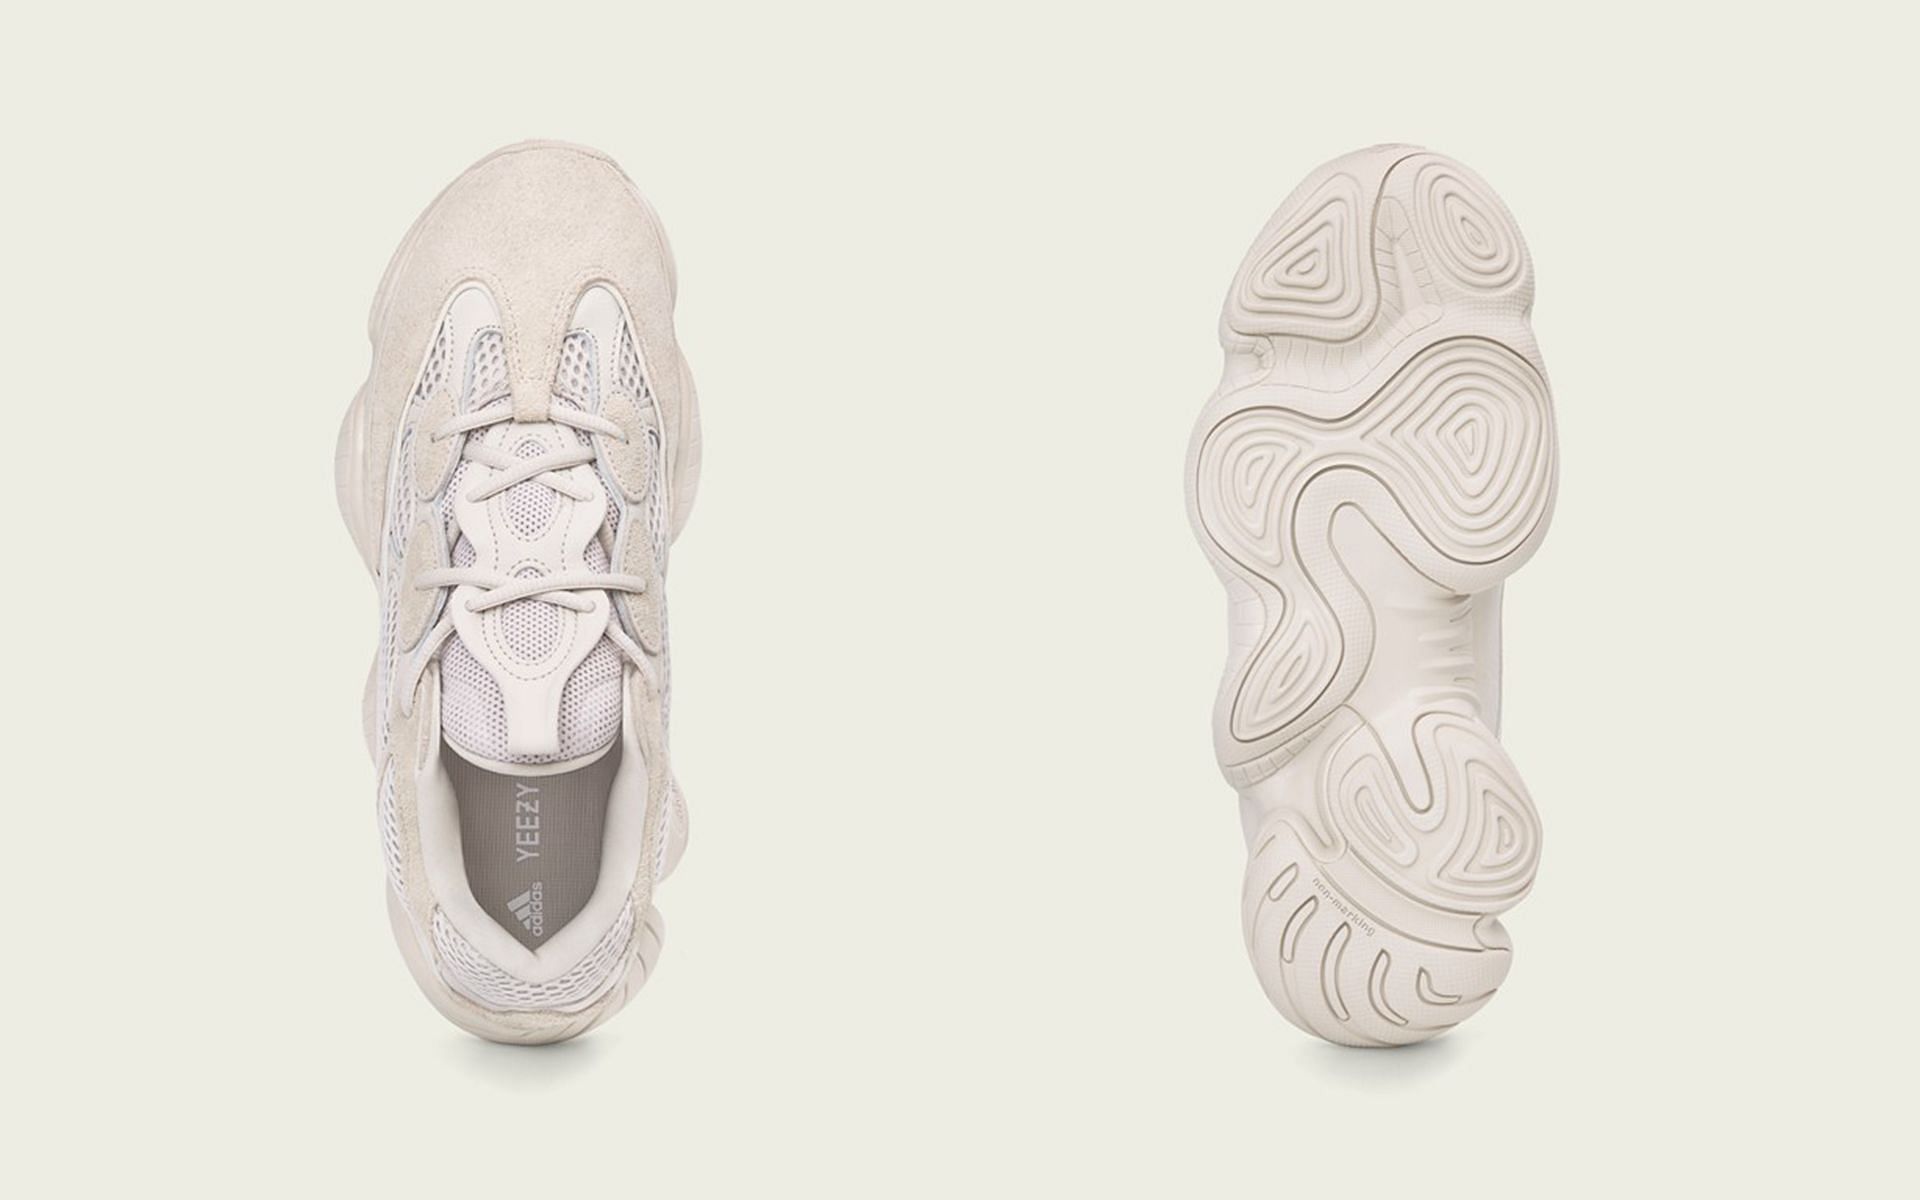 The Yeezy 500 Blush originally dropped during the NBA All-Star weekend in 2018 (Image via Adidas)